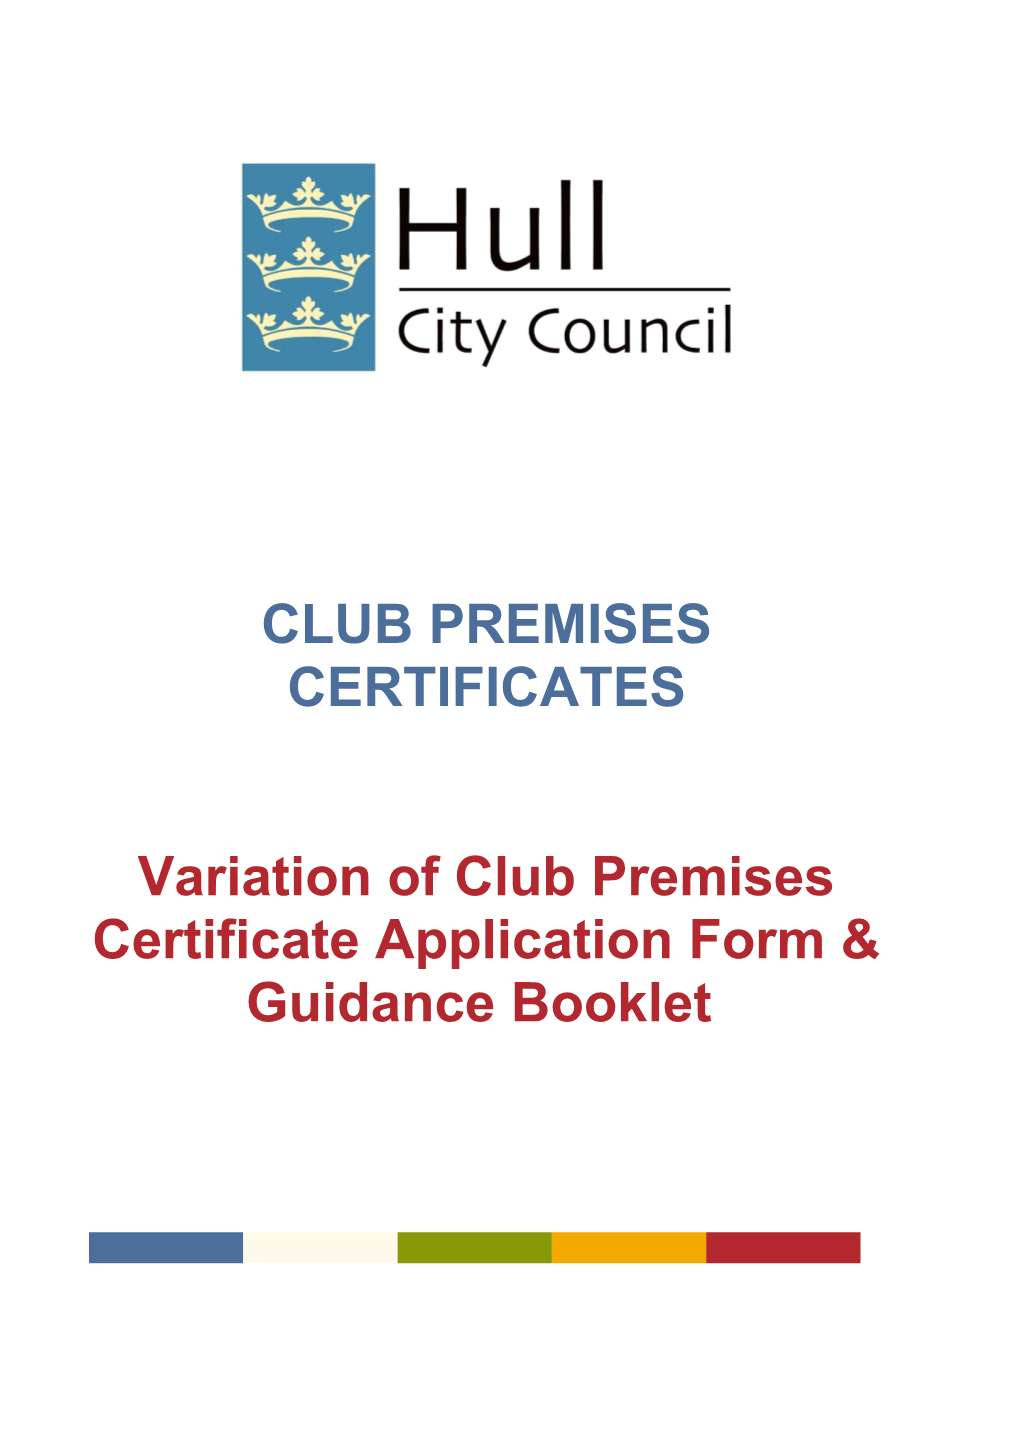 Variation of Club Premises Certificate Application Form & Guidance Booklet